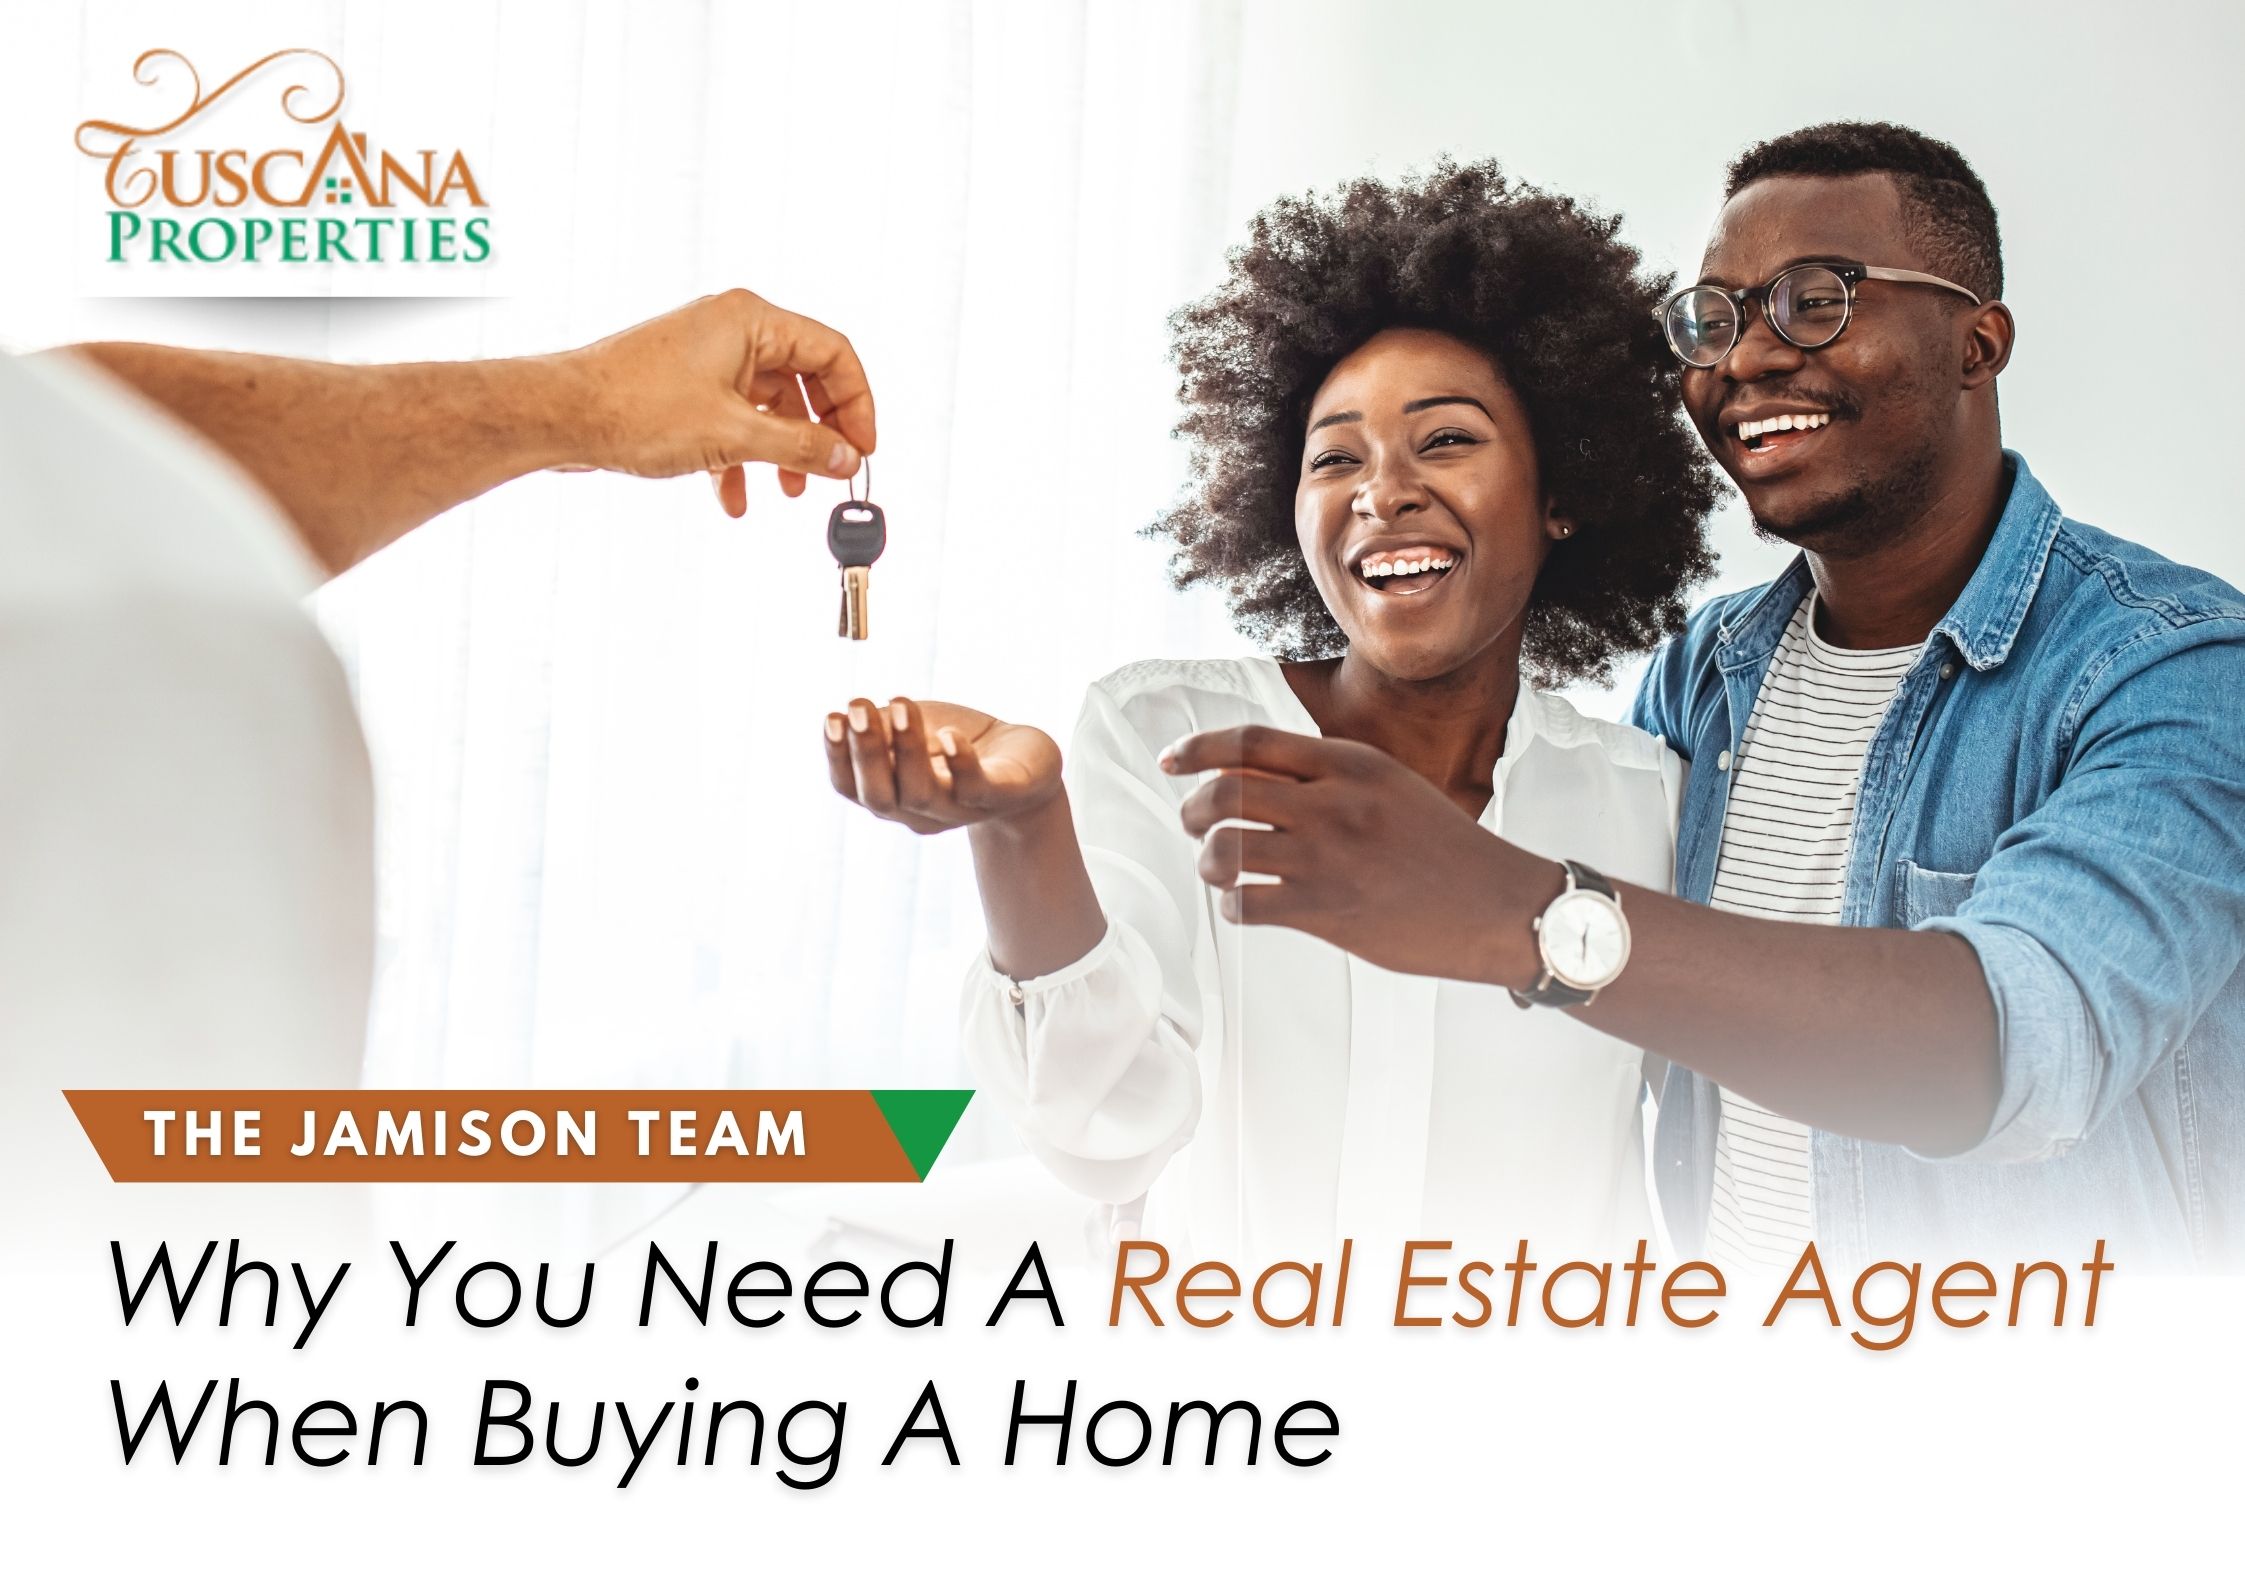 Why you need a Real Estate Agent when buying a home